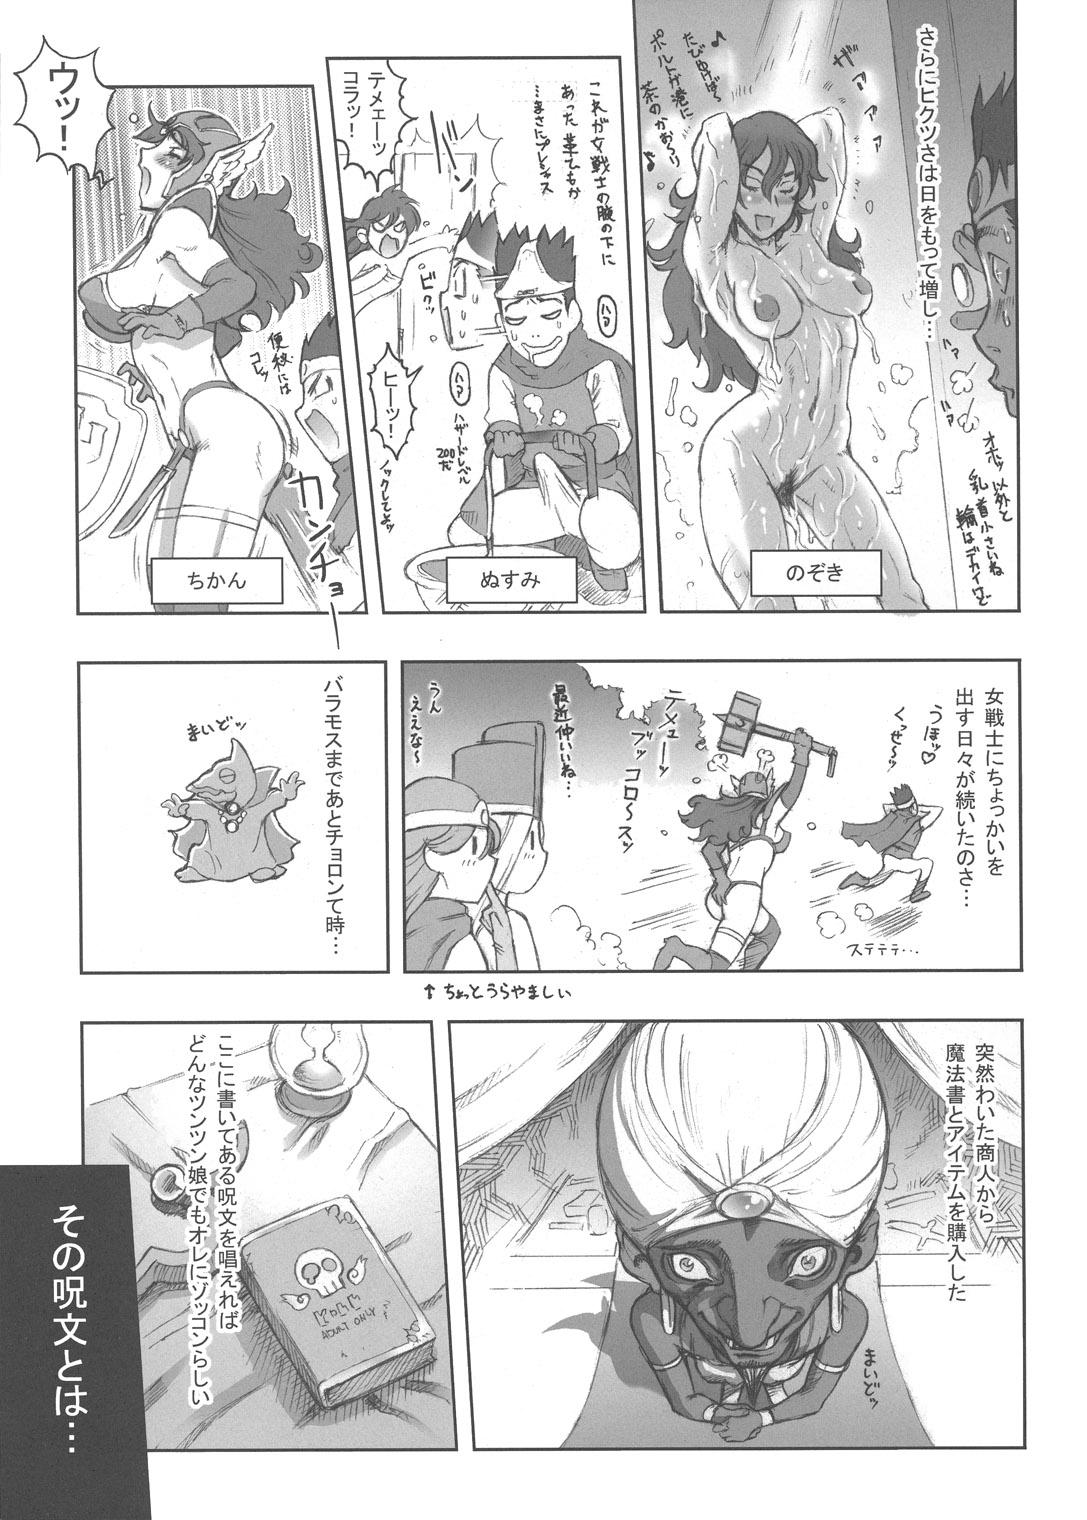 Mulher Nippon Onna Heroine 3 - Sailor moon Dragon quest iii Amazing - Page 6